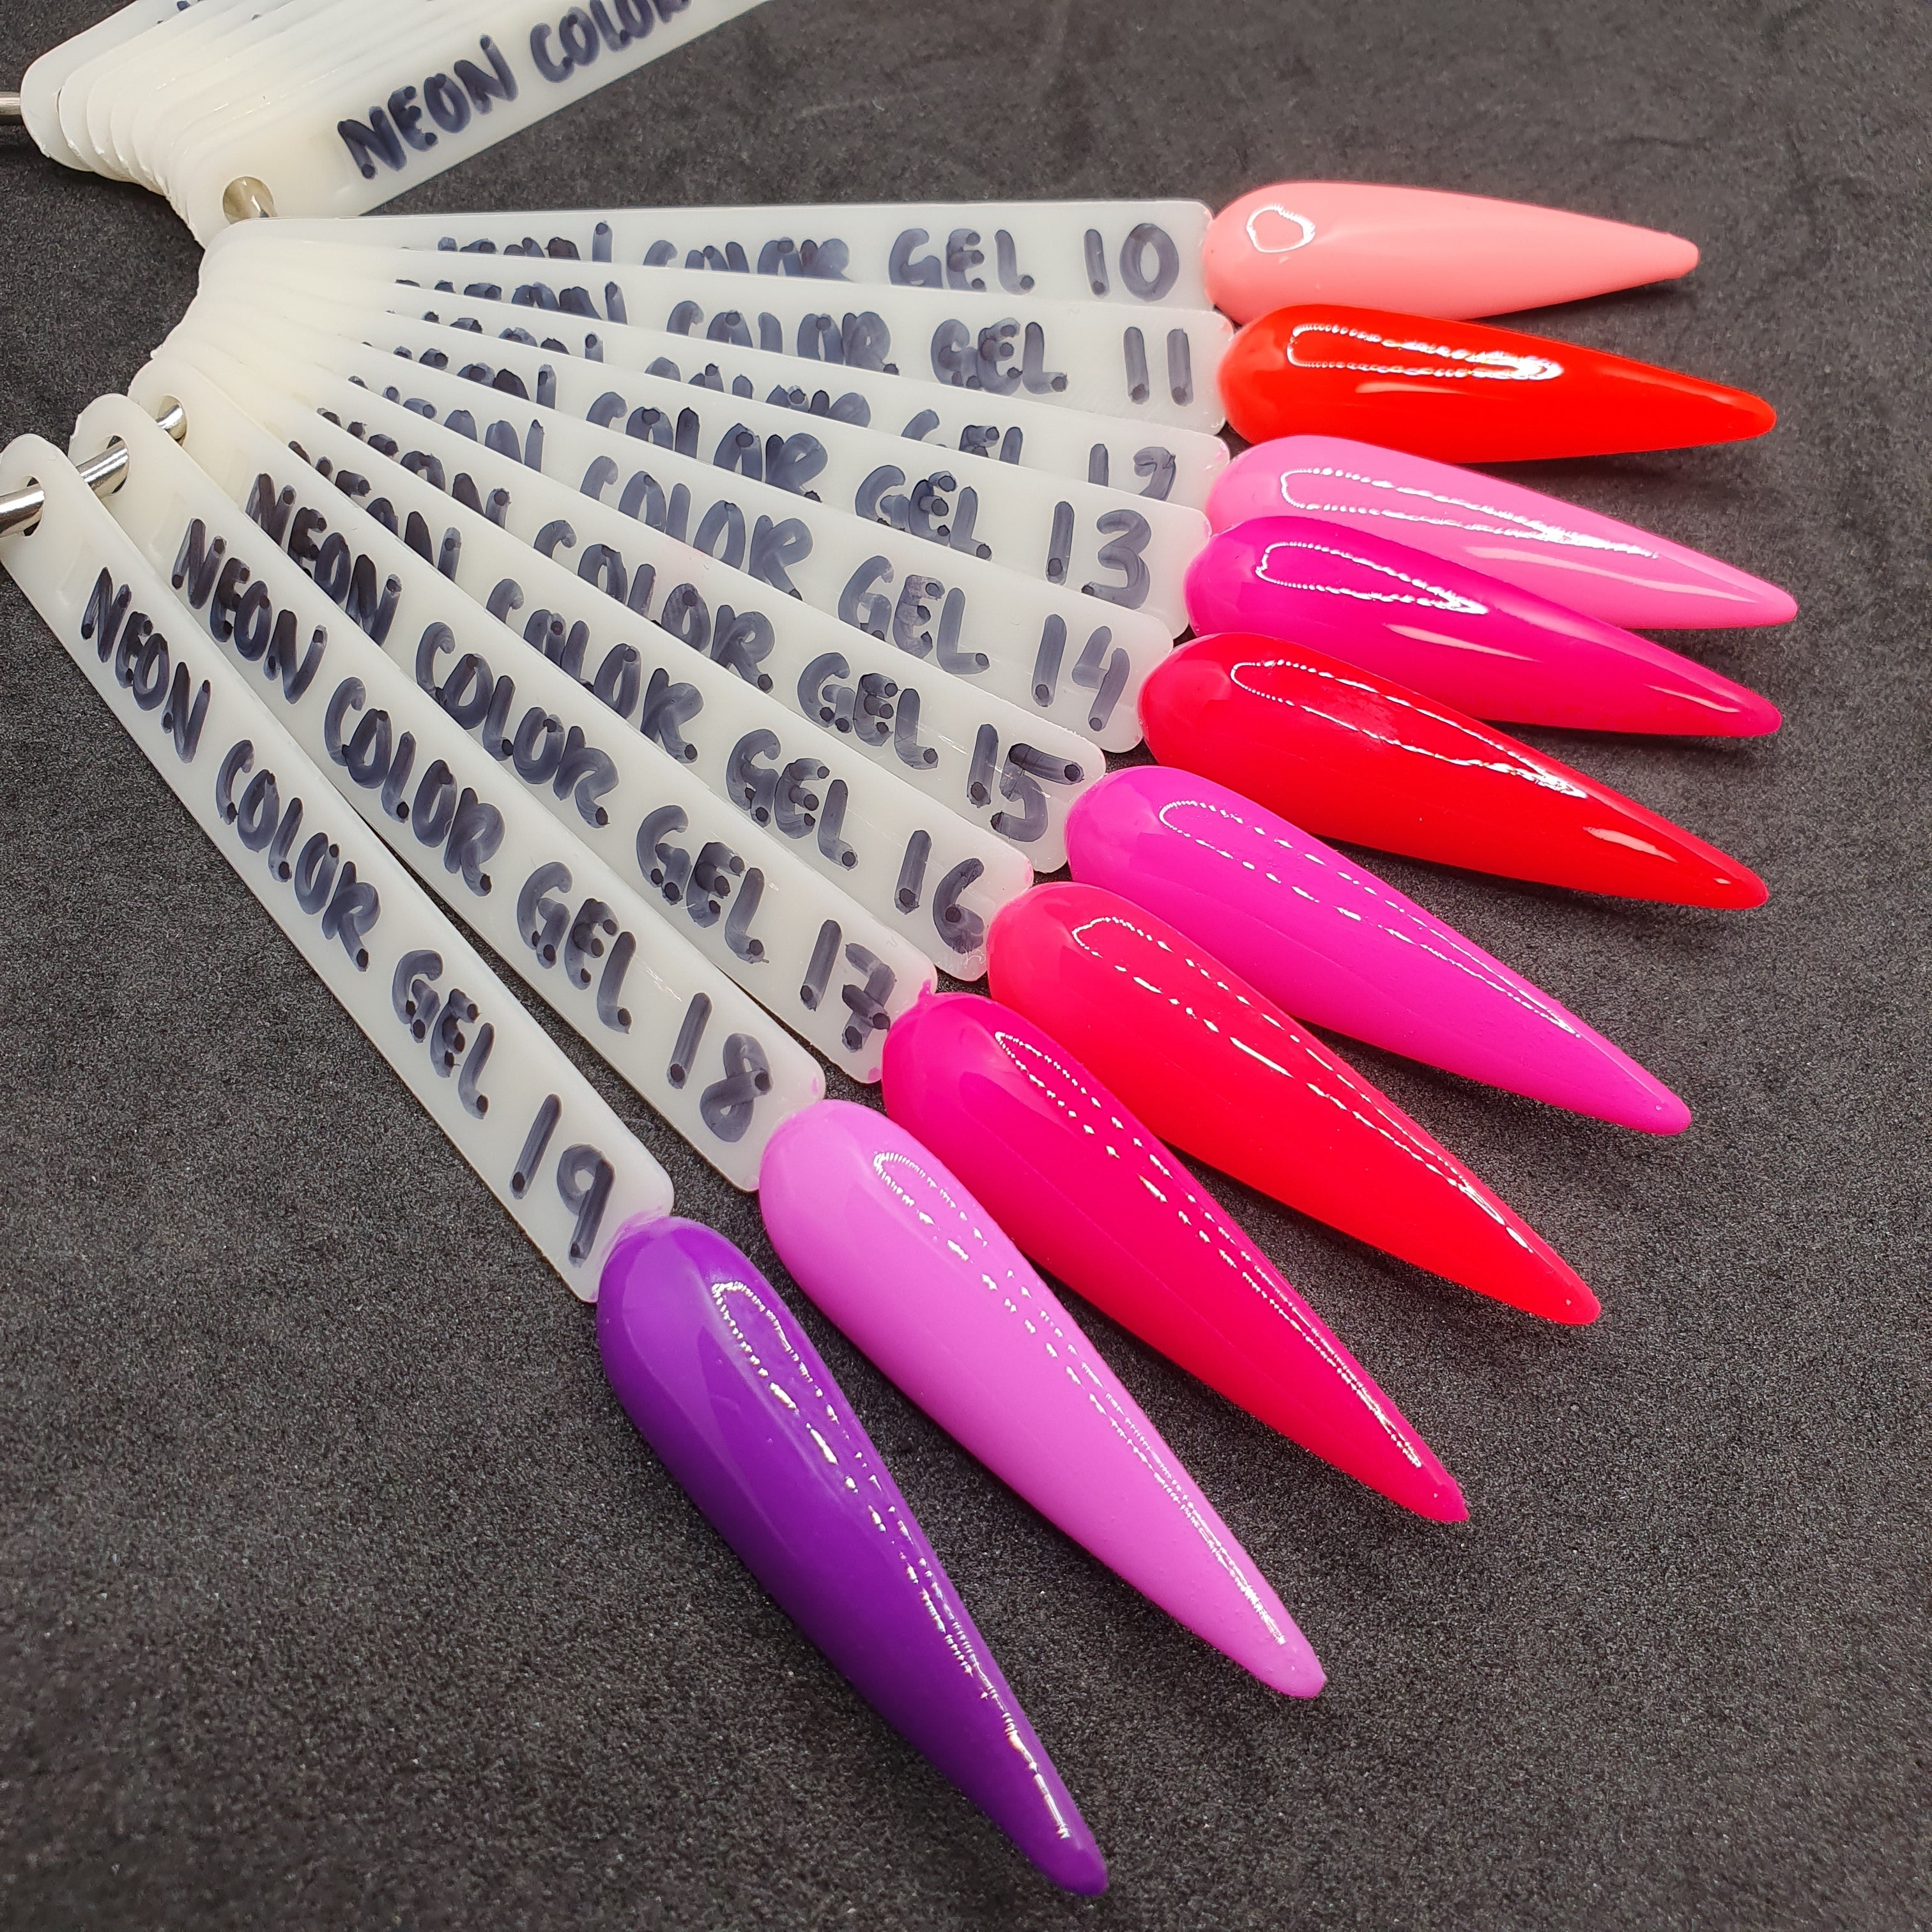 NEW - GND NEON GEL COLOR - 16